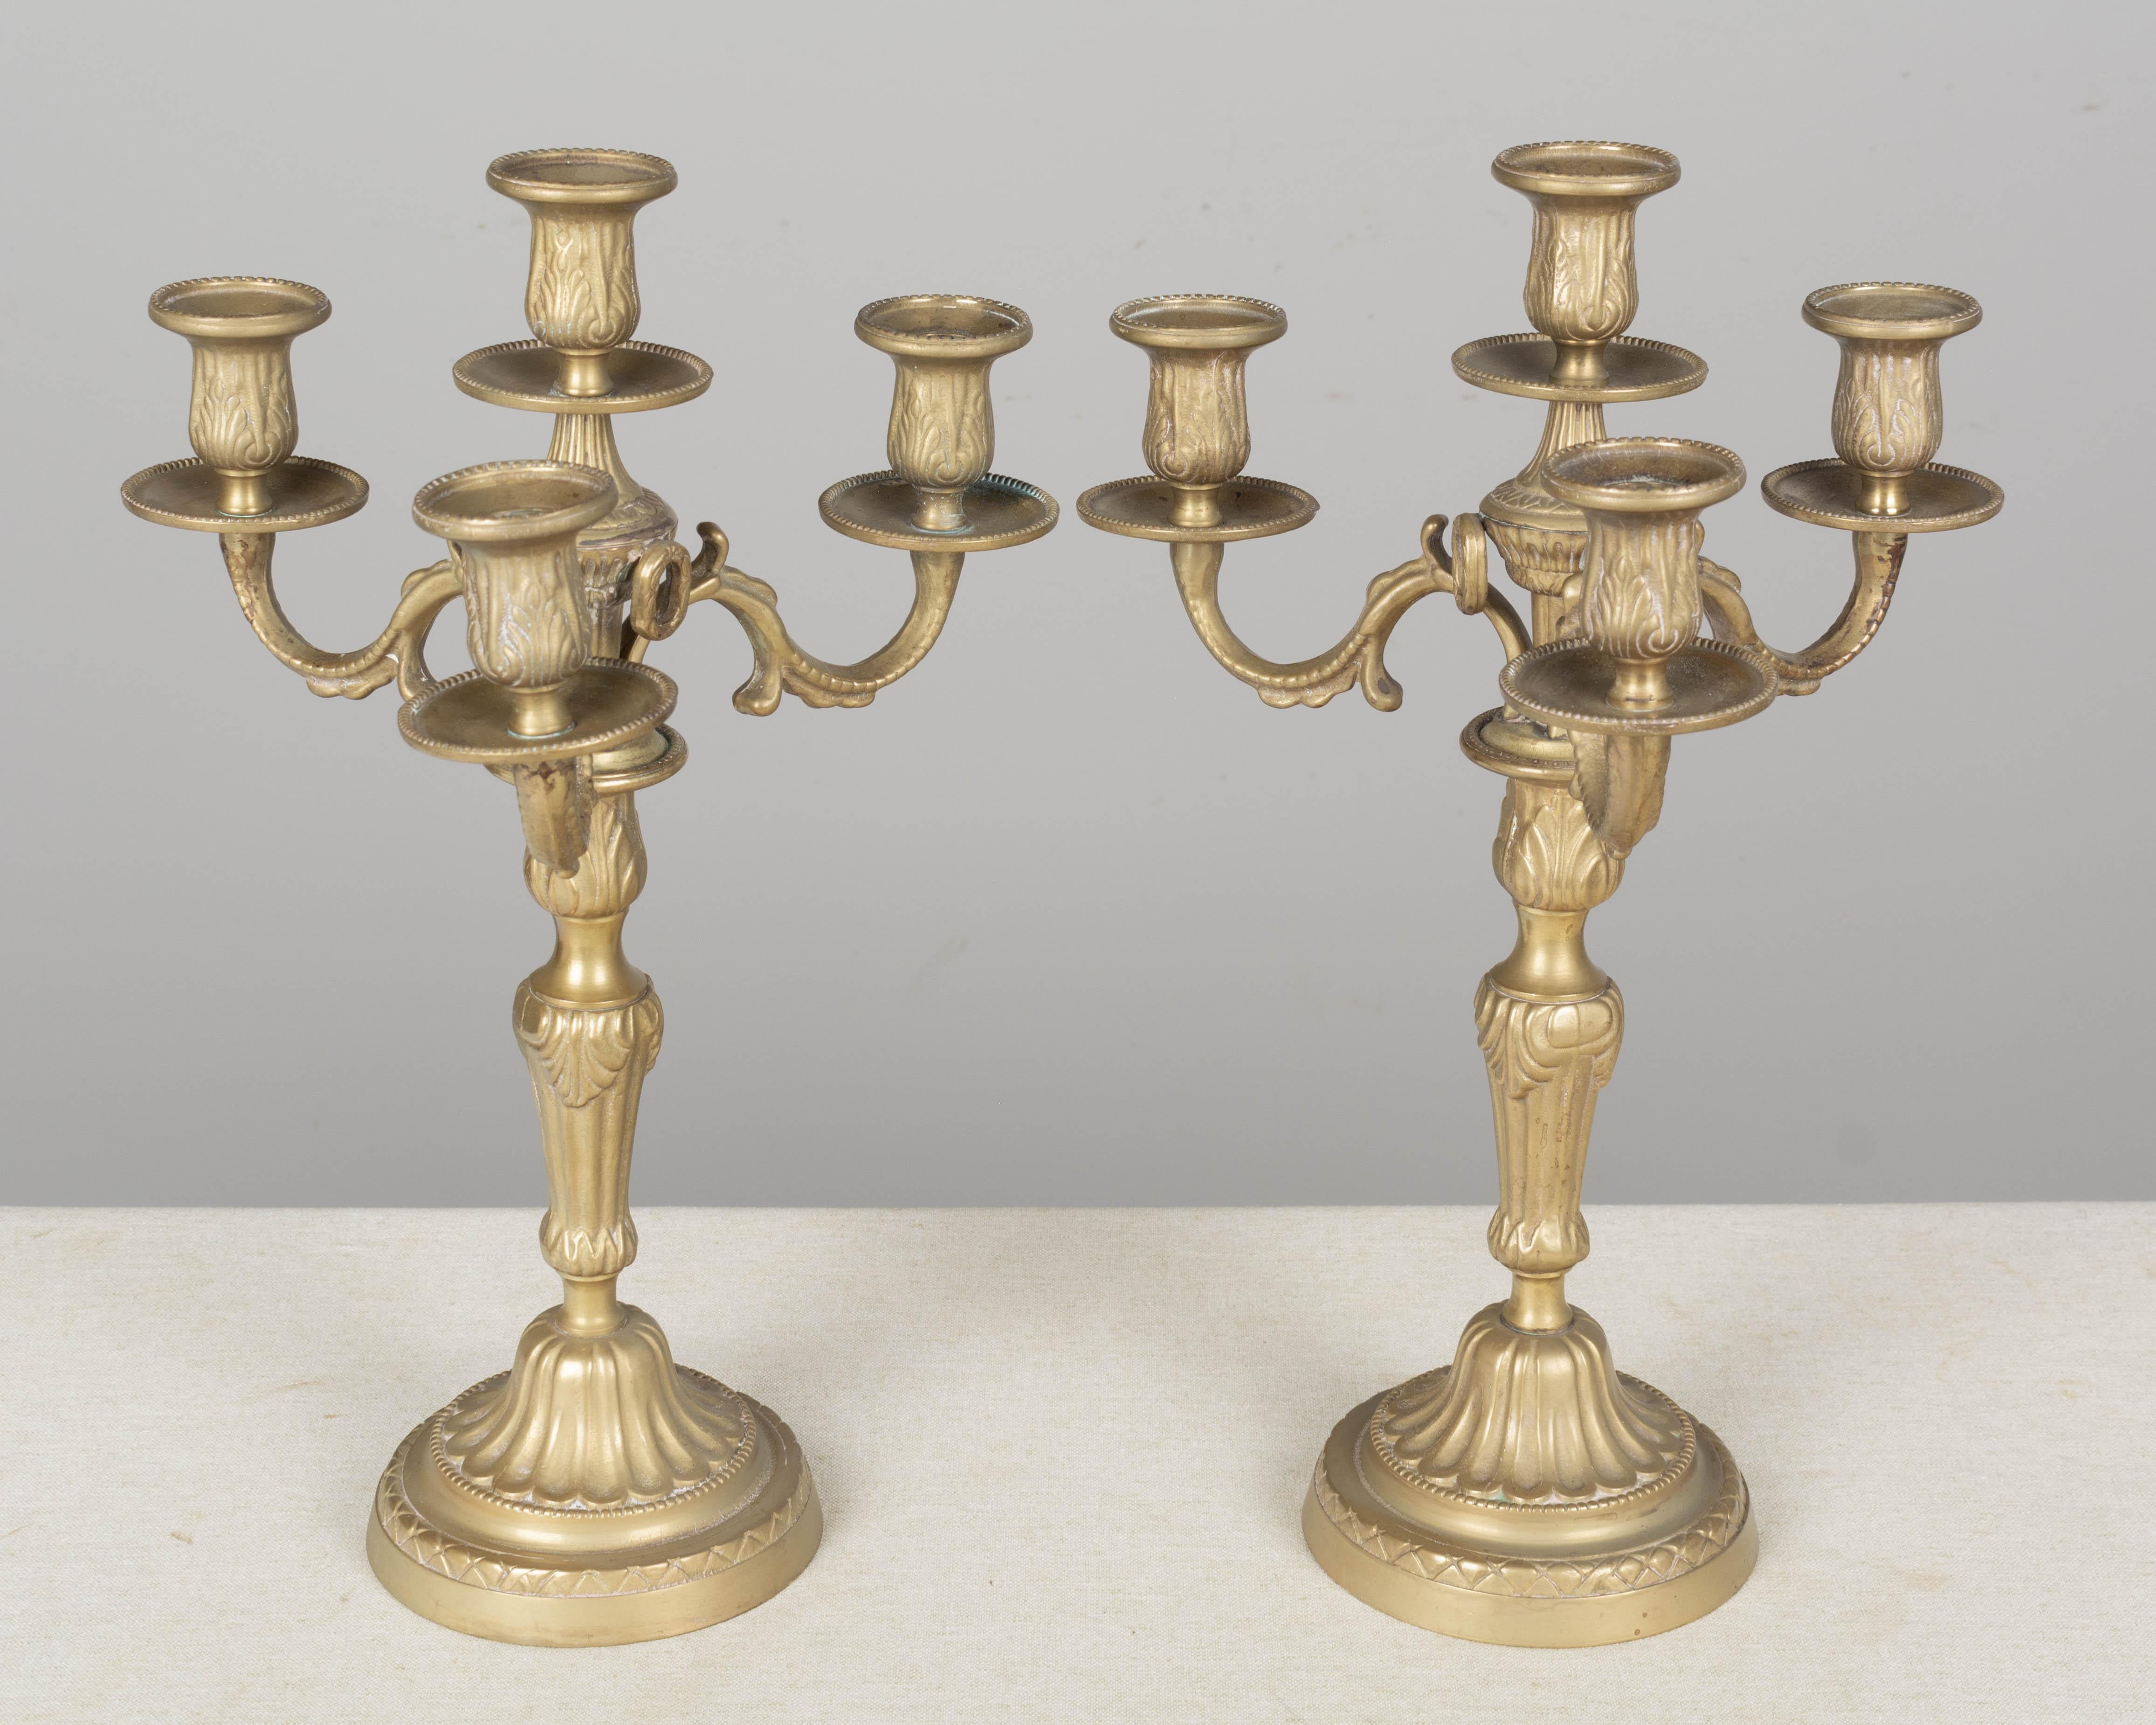 A pair of Louis XV style French brass candelabra with four candle cups and nice cast details.
Measures: 25.75